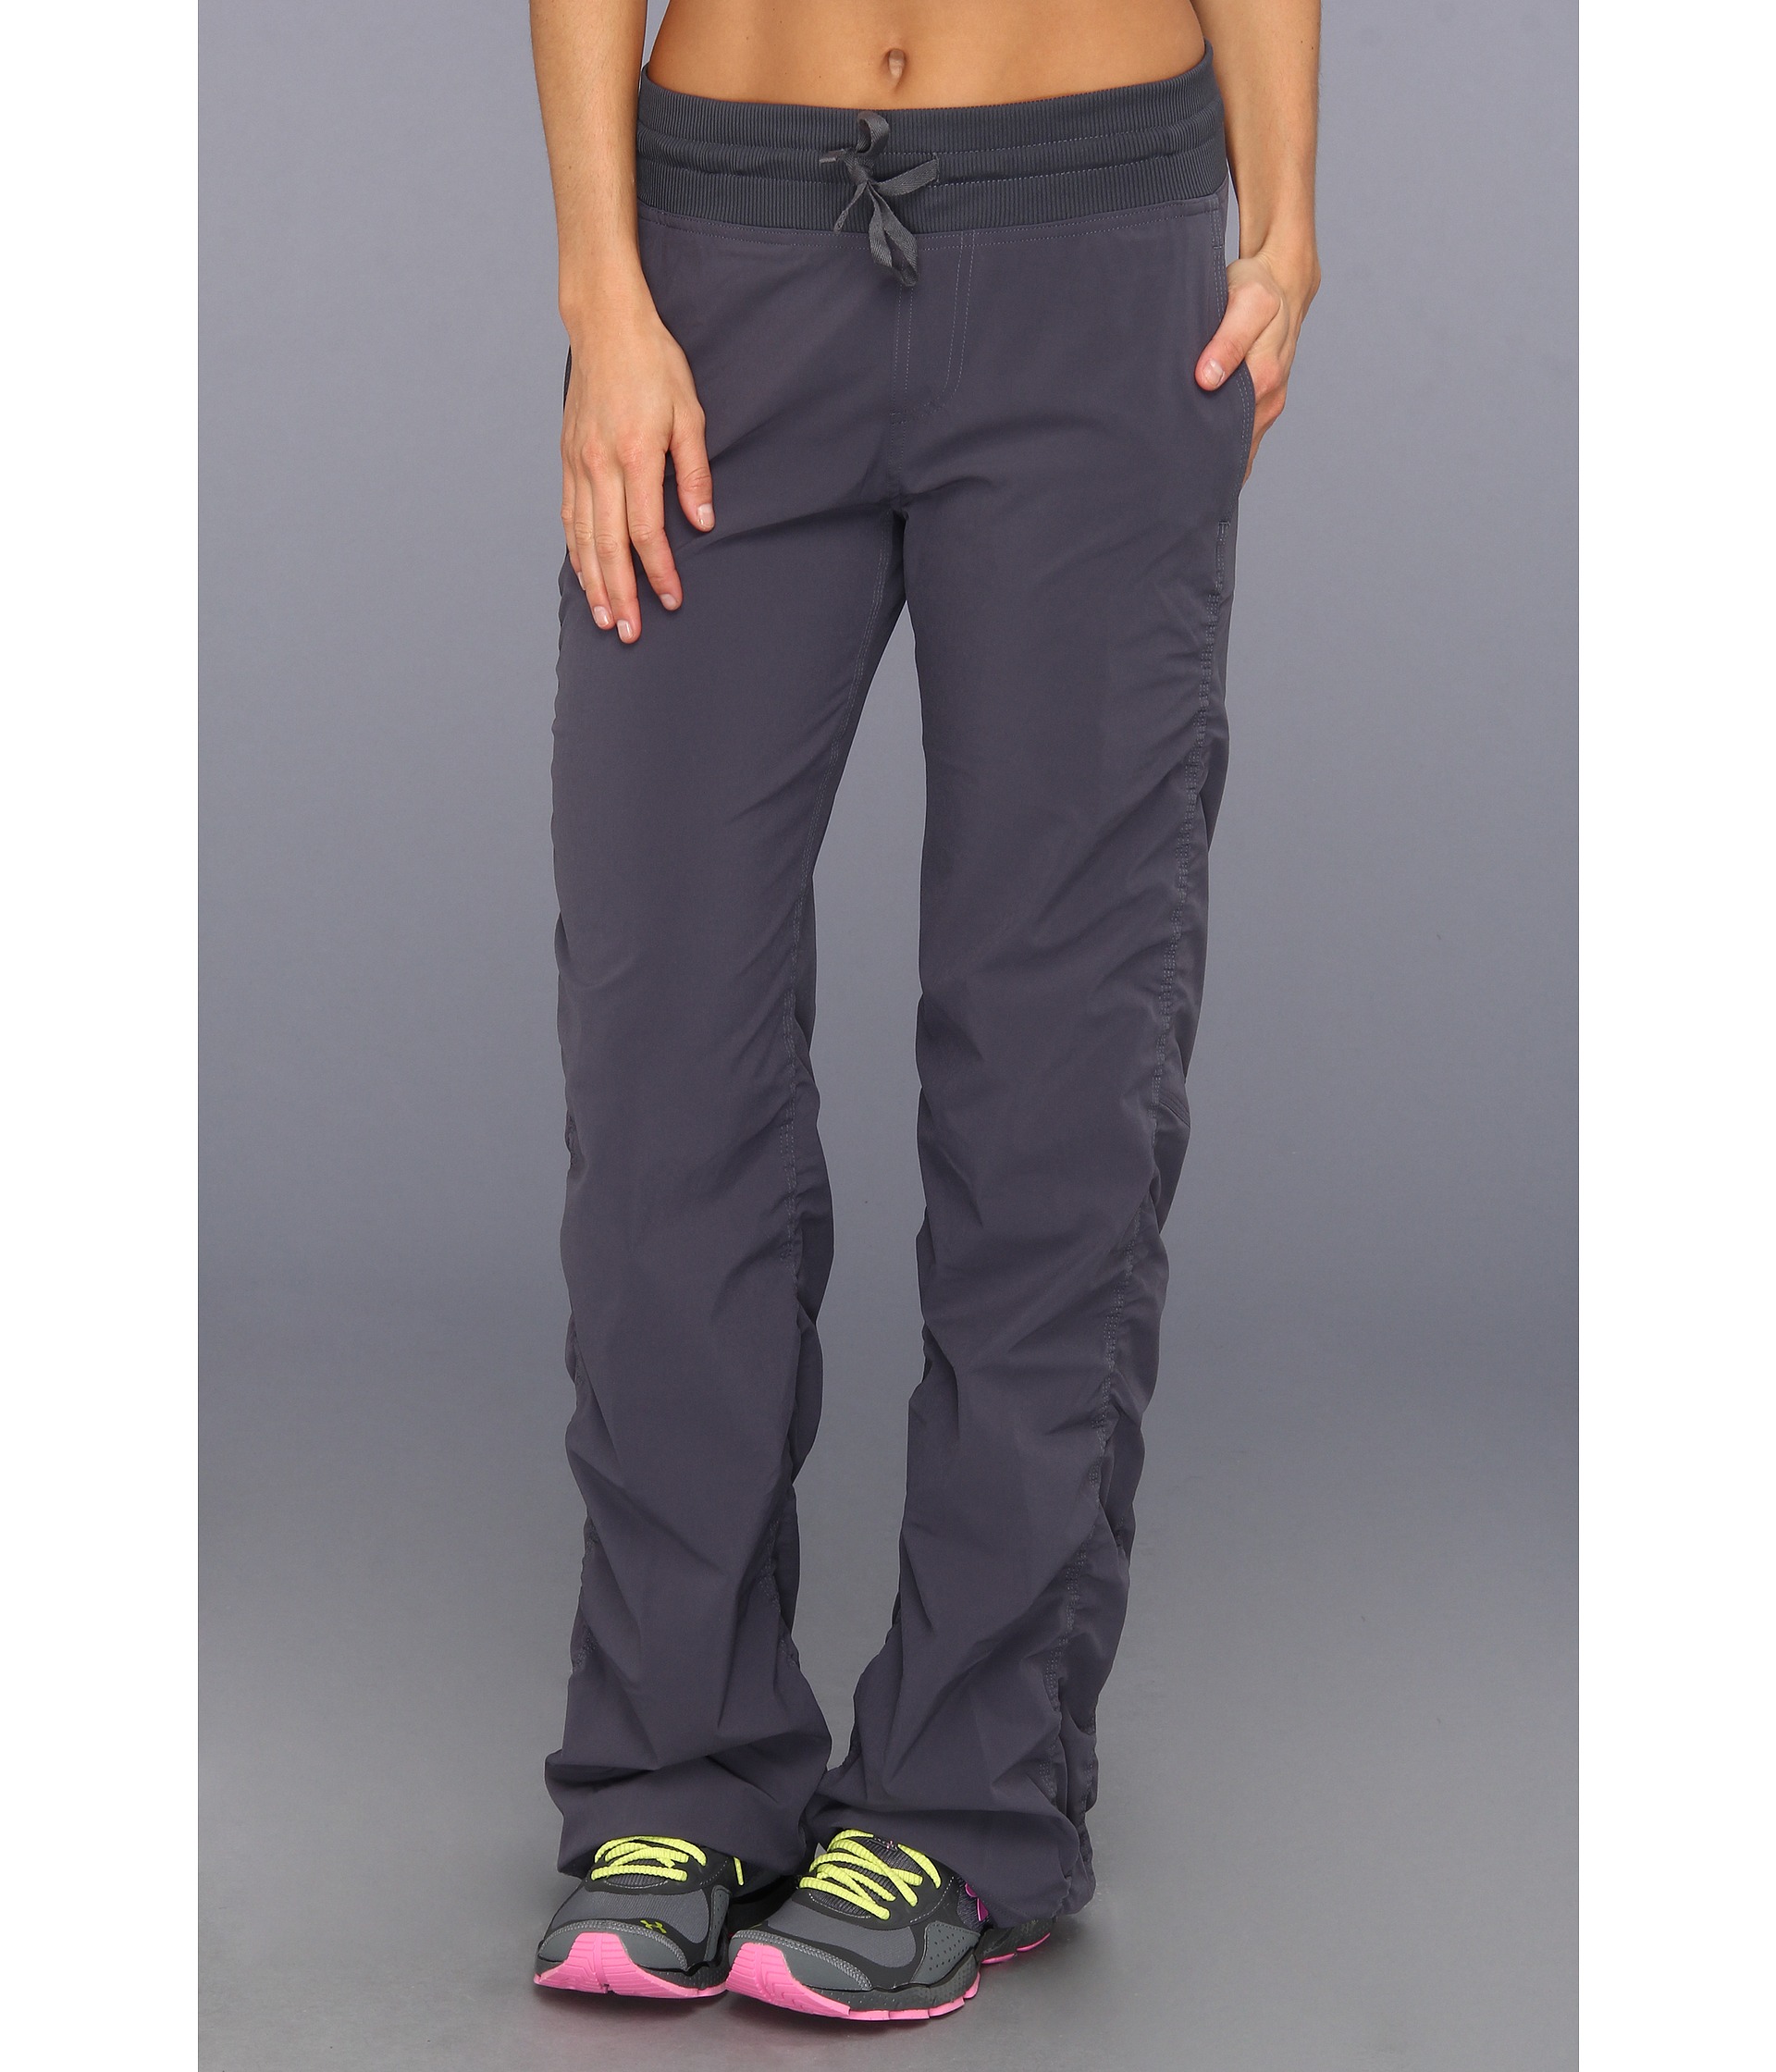 Under Armour Ua Icon Pant | Shipped Free at Zappos